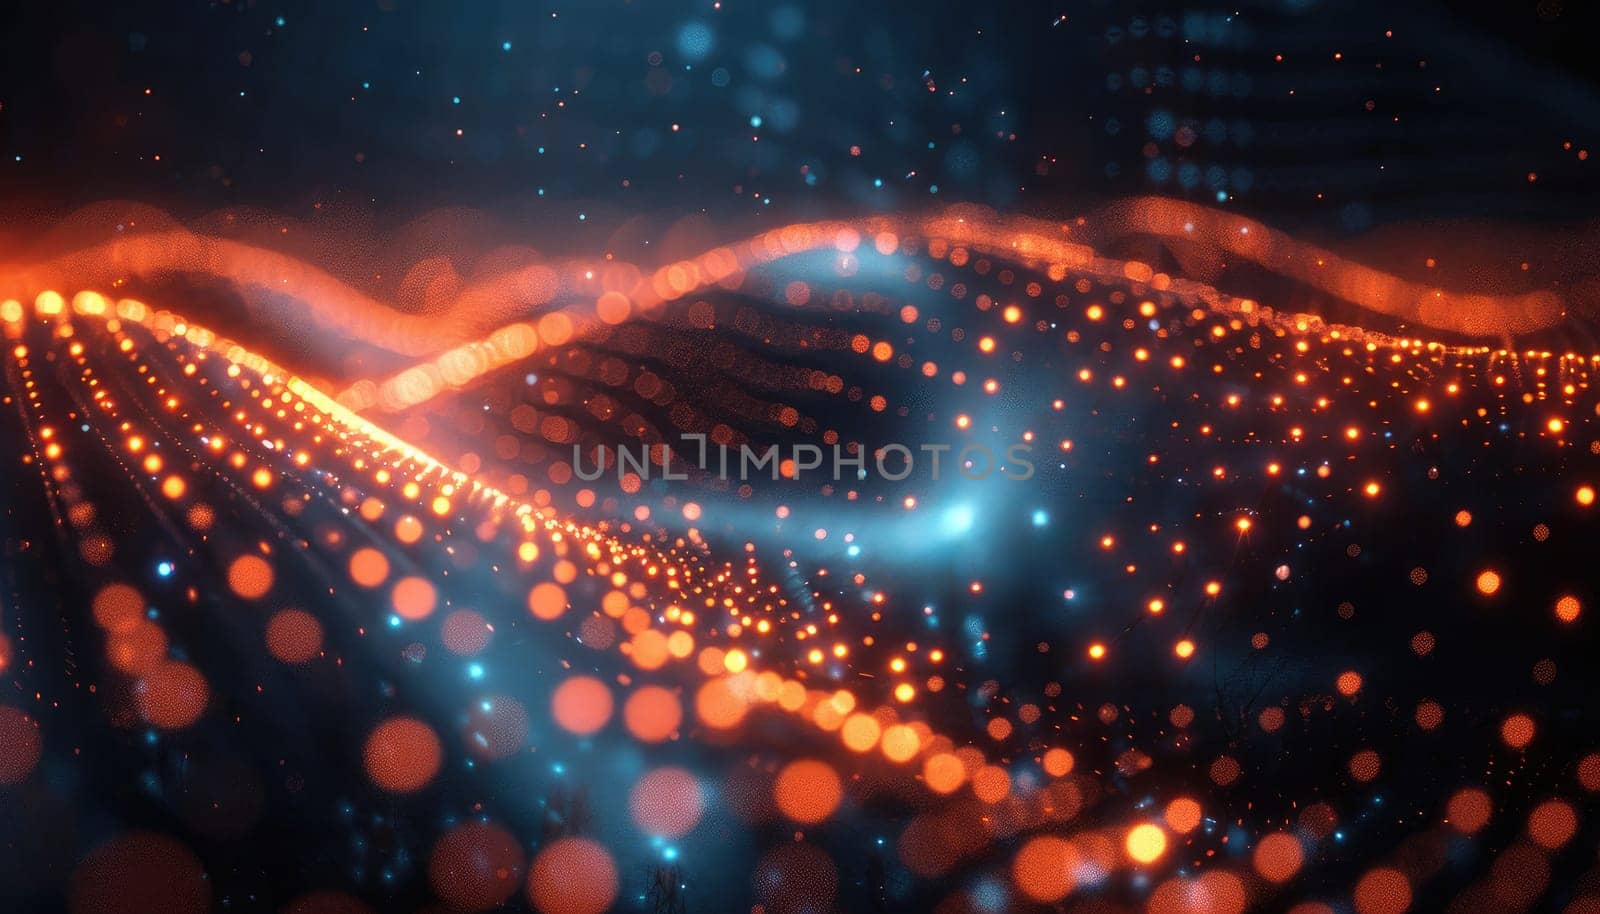 A blurry image of a wave with orange and blue dots by AI generated image.